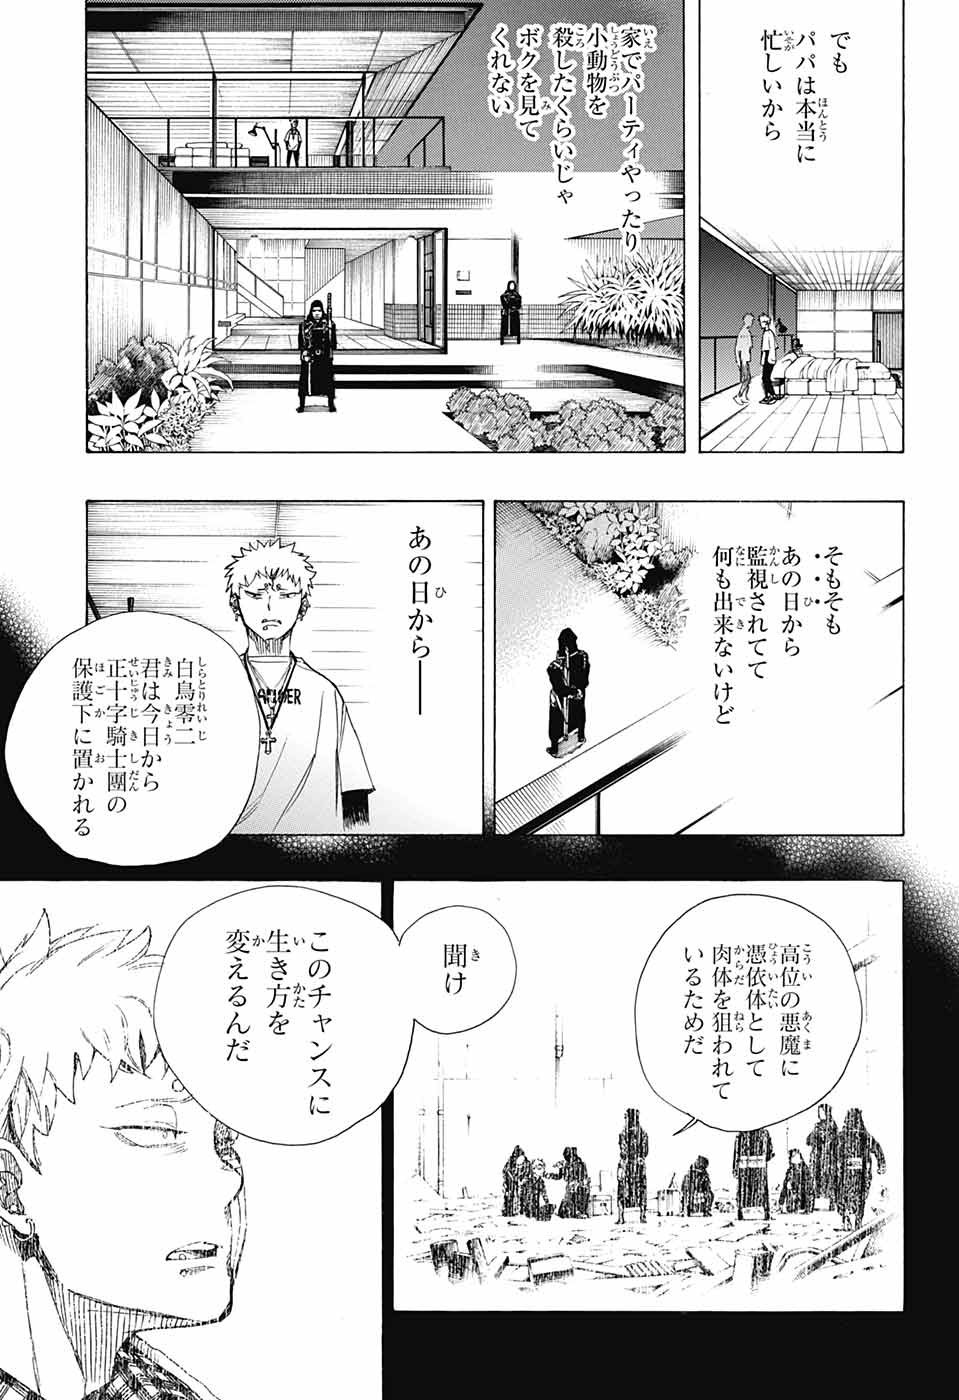 Ao no Exorcist - Chapter 134 - Page 30